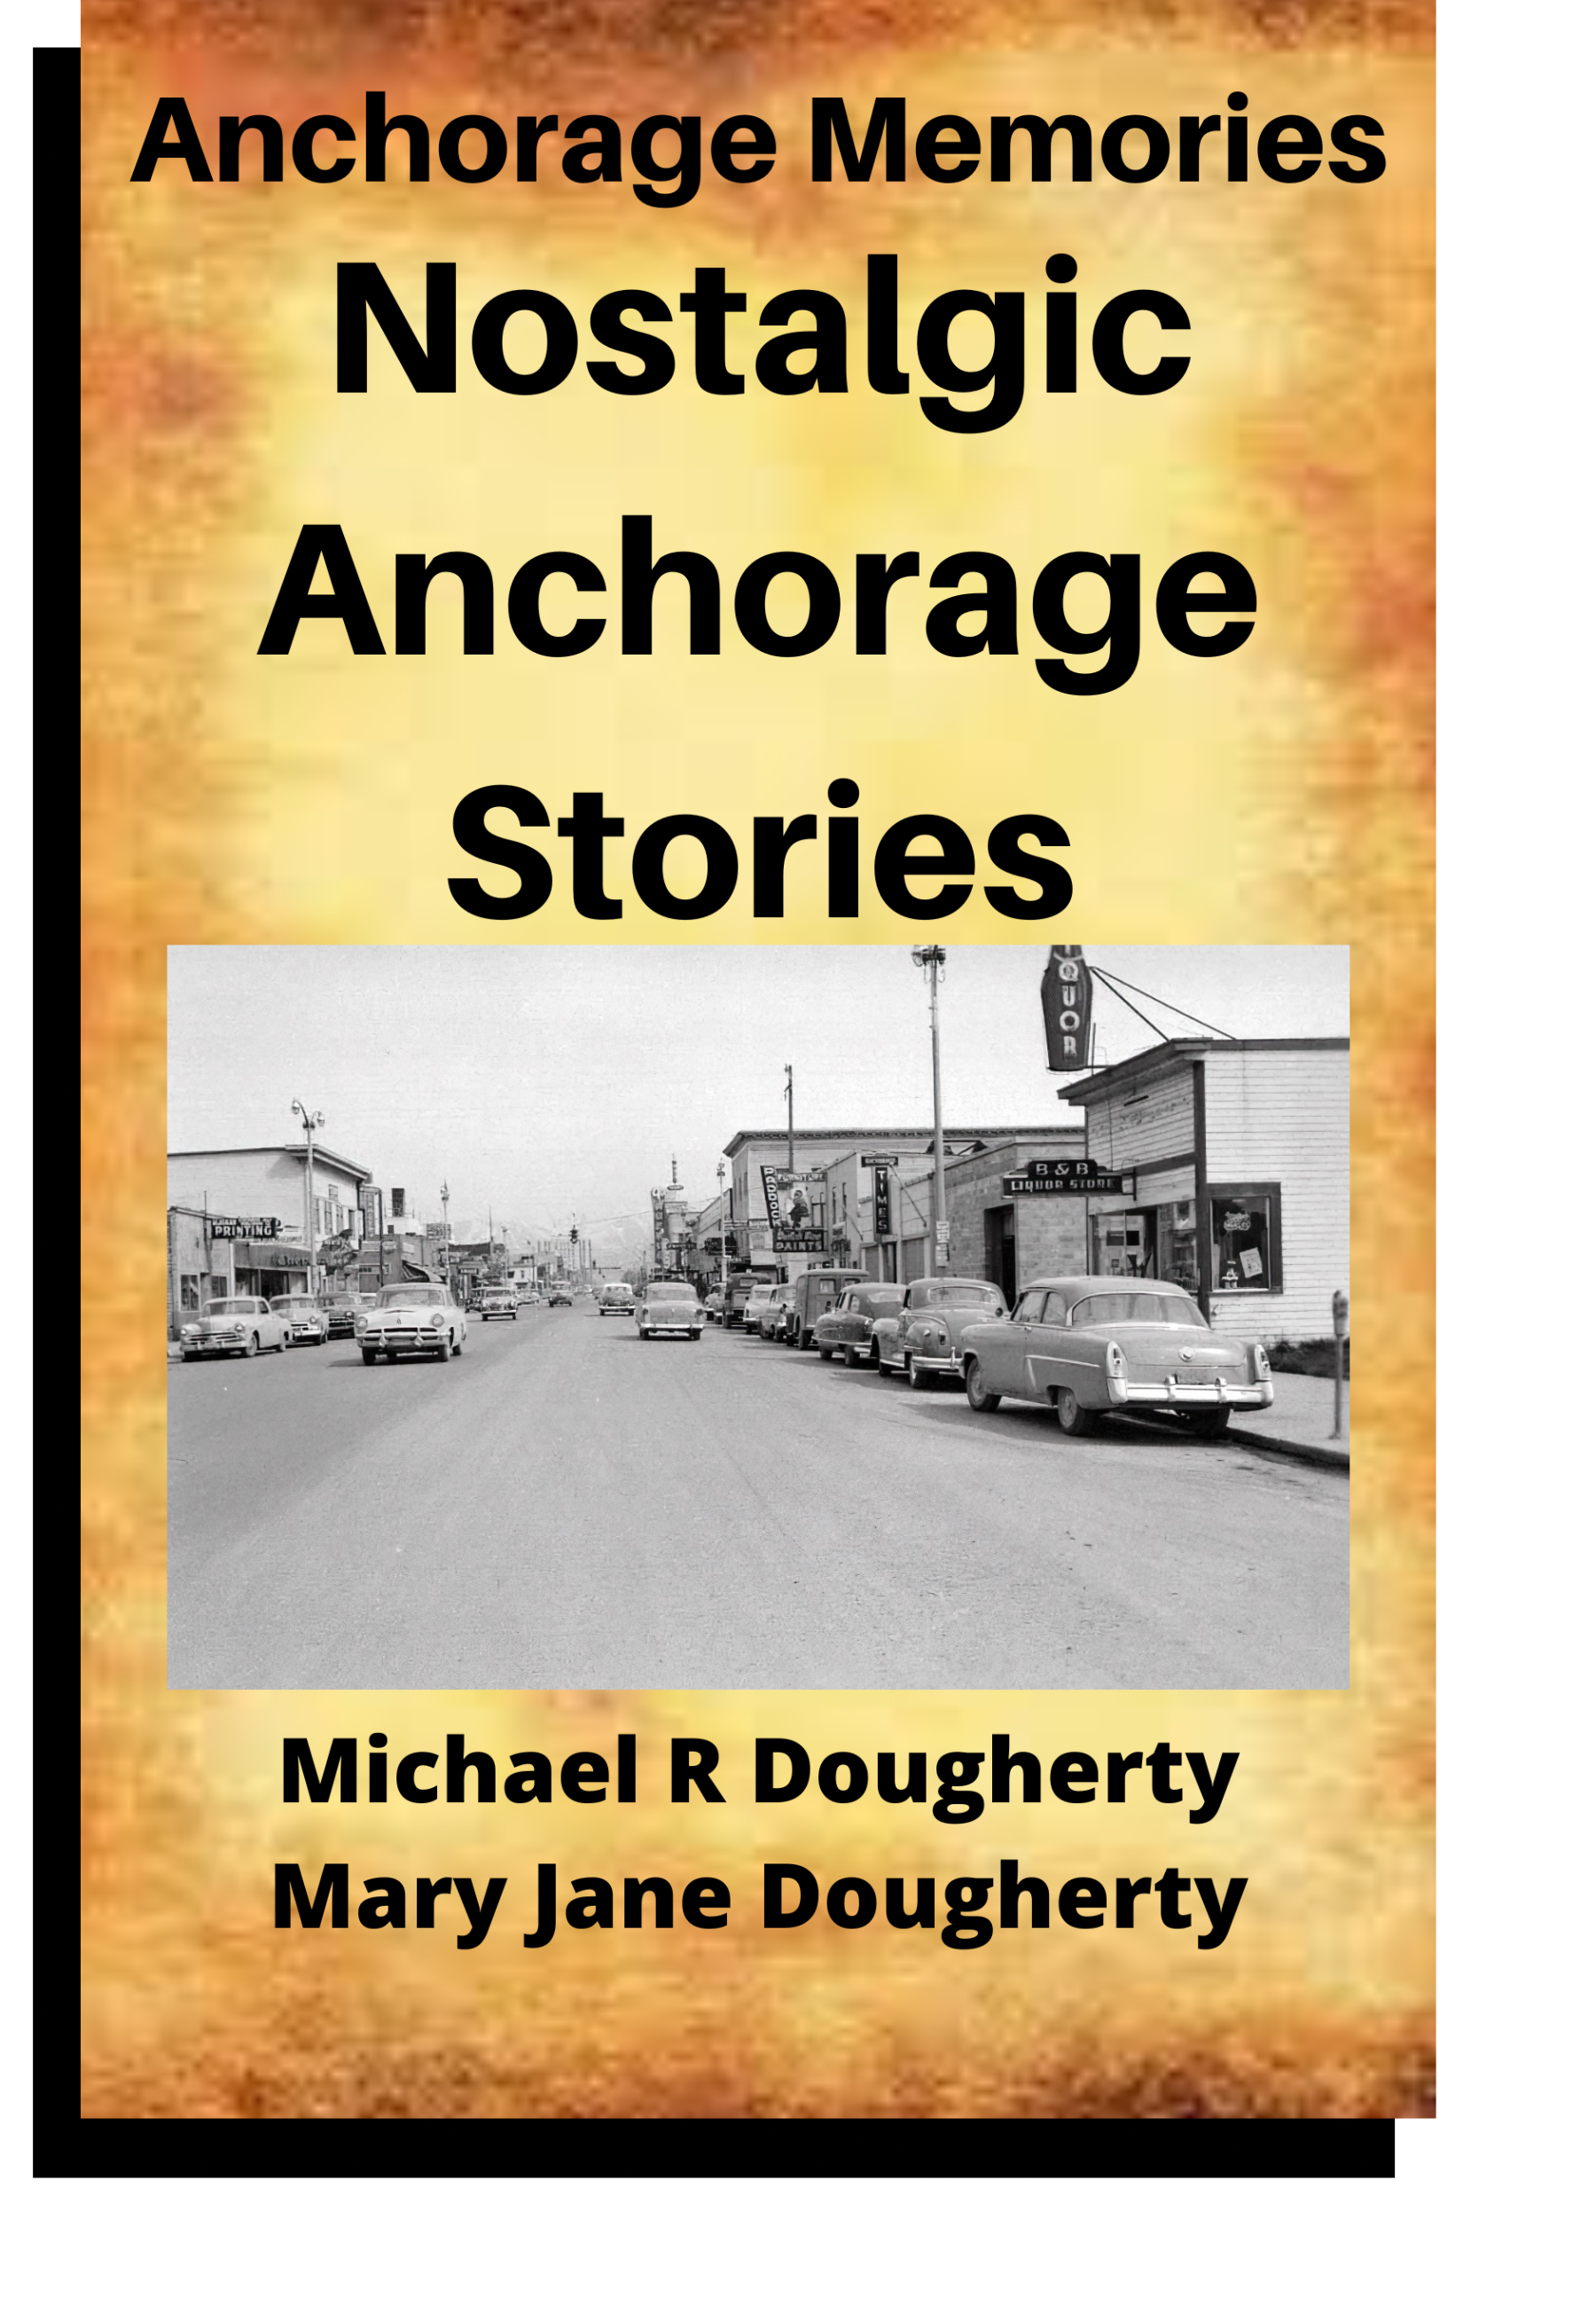 Stories about Anchorage